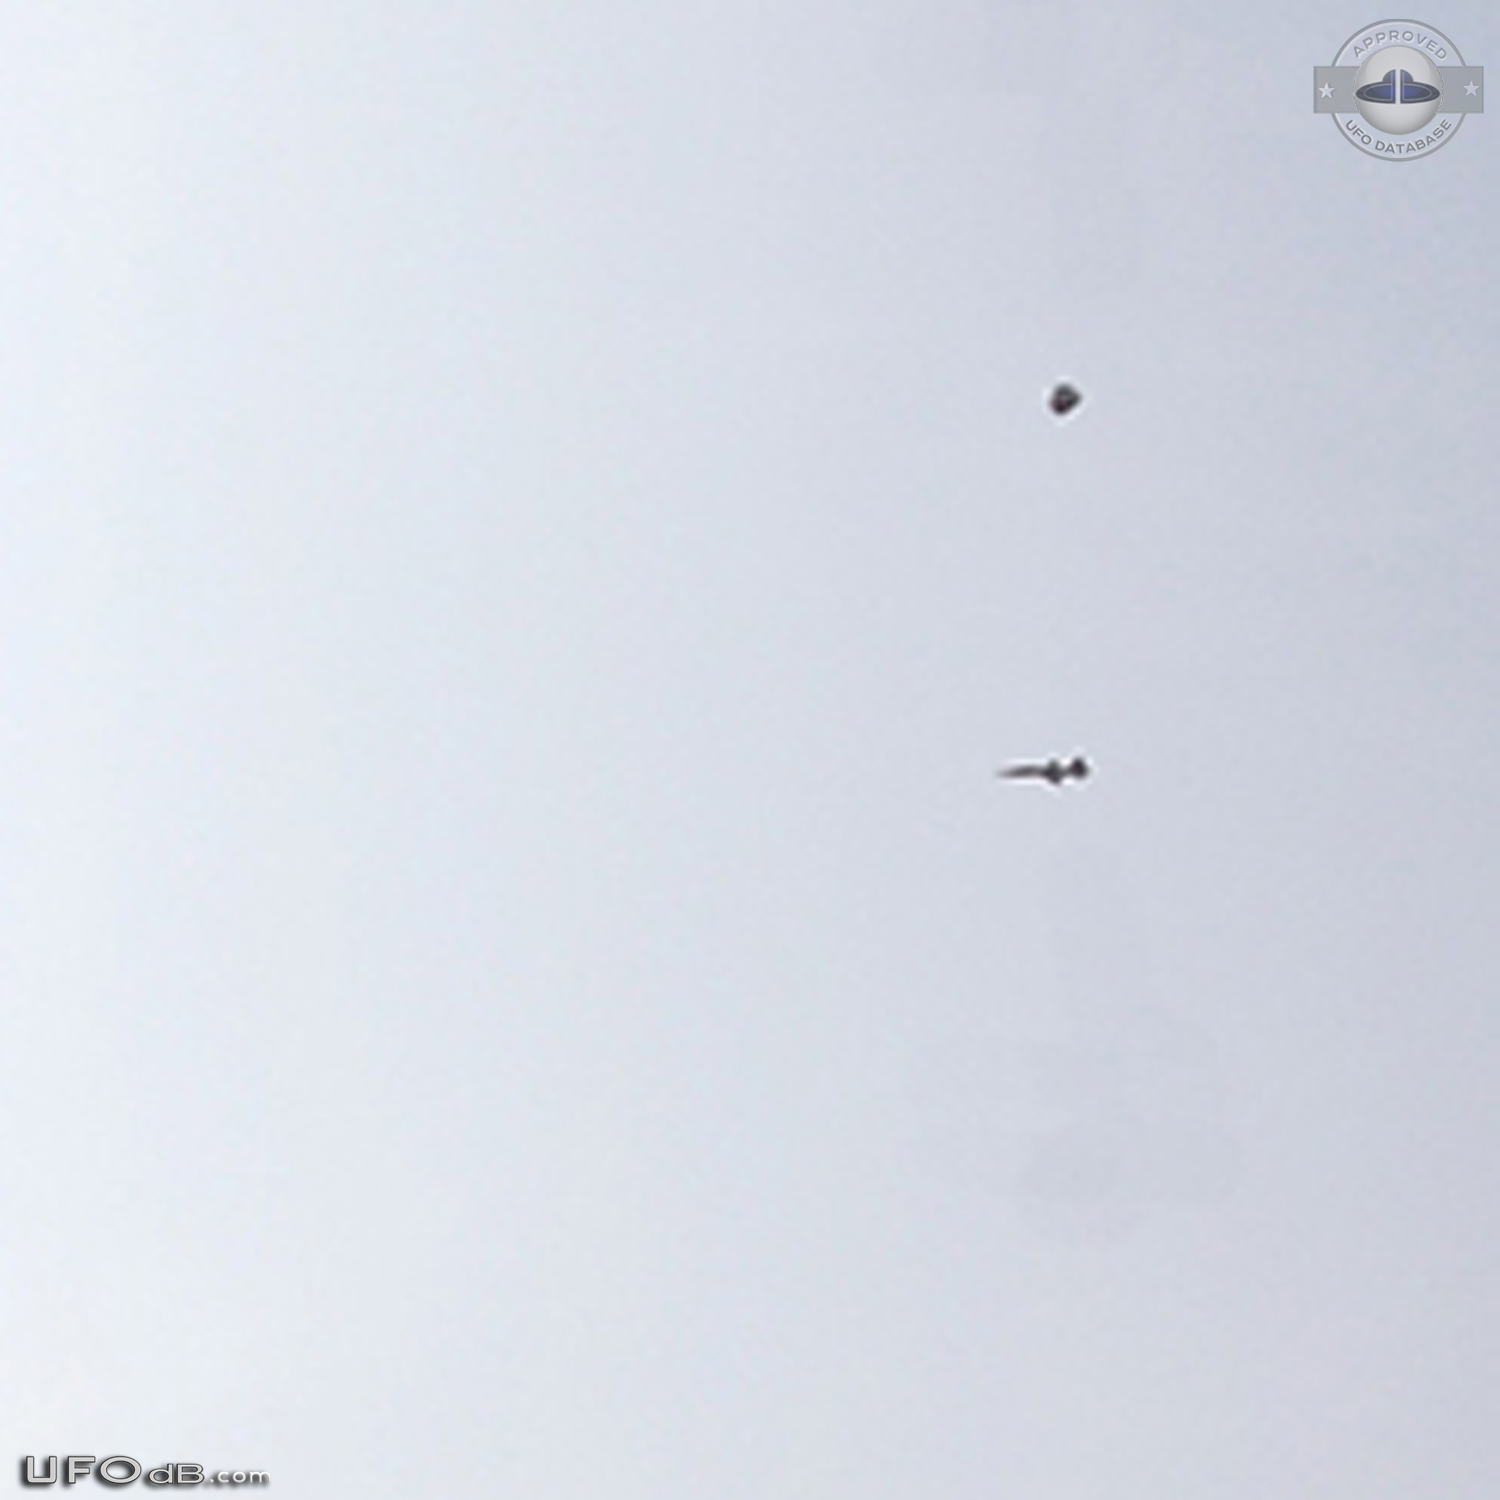 F-5 fighter aircraft seen near UFO in Doganbey, Aegean in Turkey 20144 UFO Picture #569-2